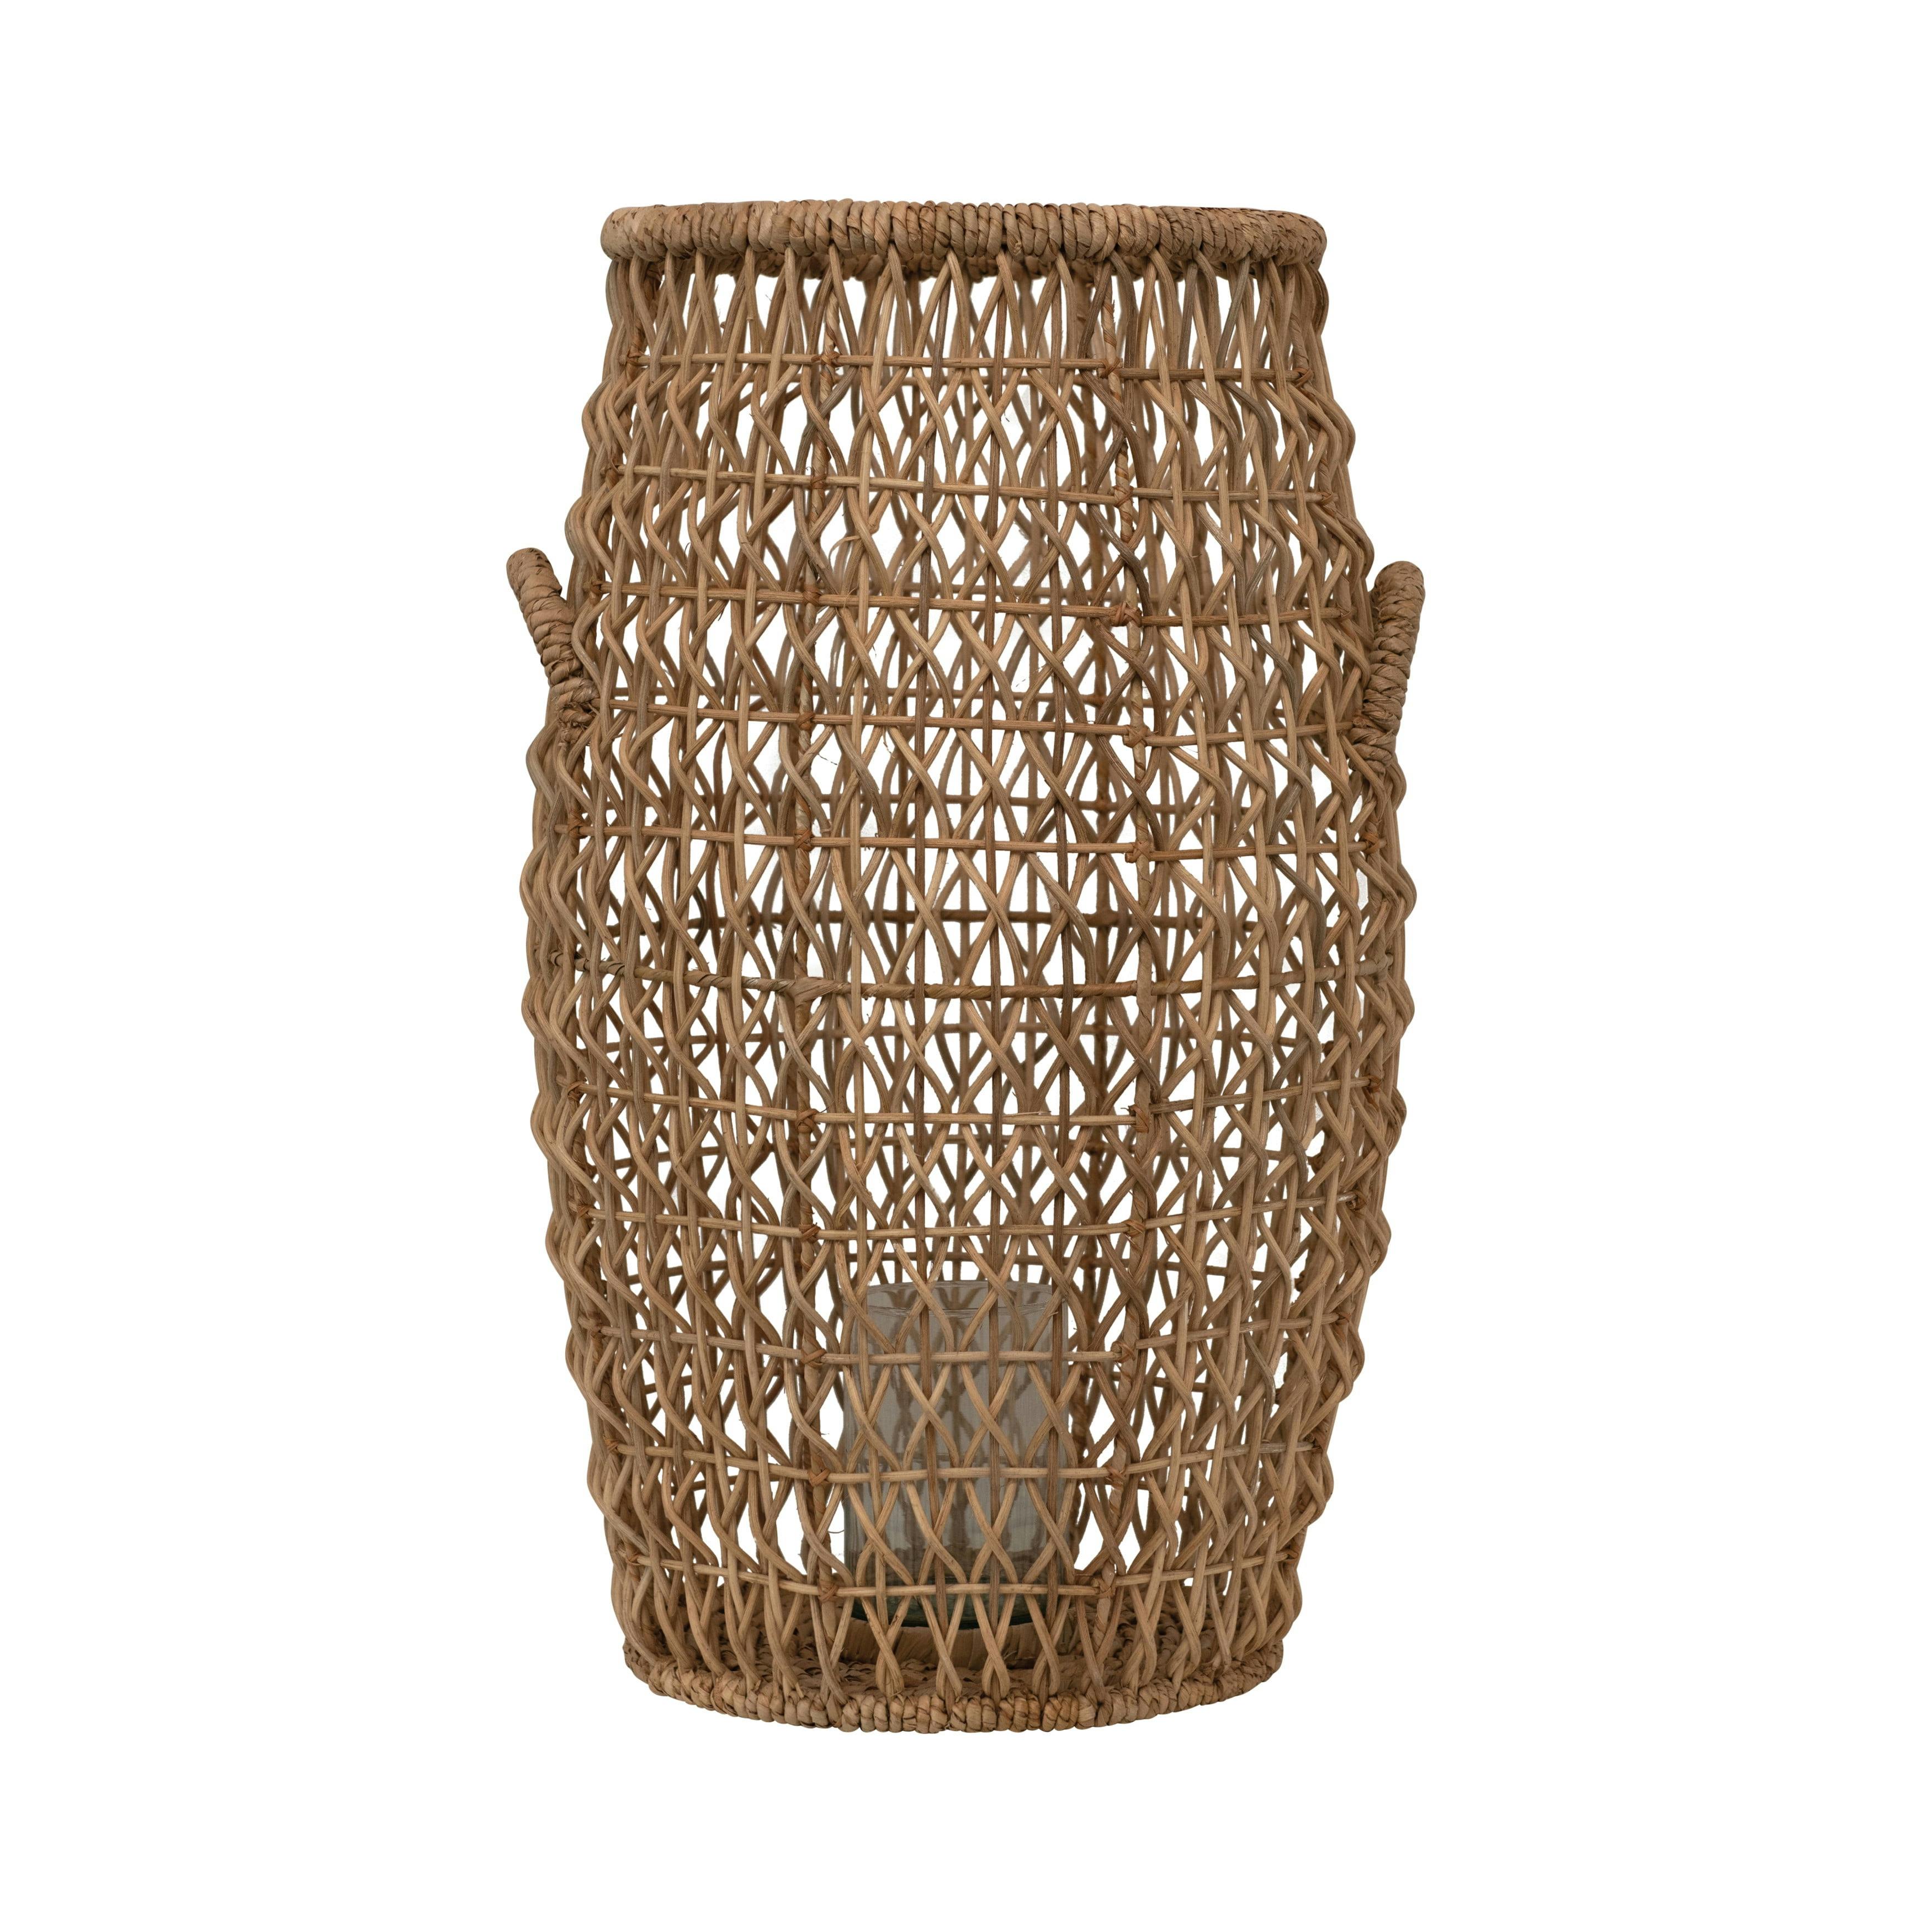 Elysian 26'' Hand-Woven Rattan & Water Hyacinth Candle Lantern with Glass Insert